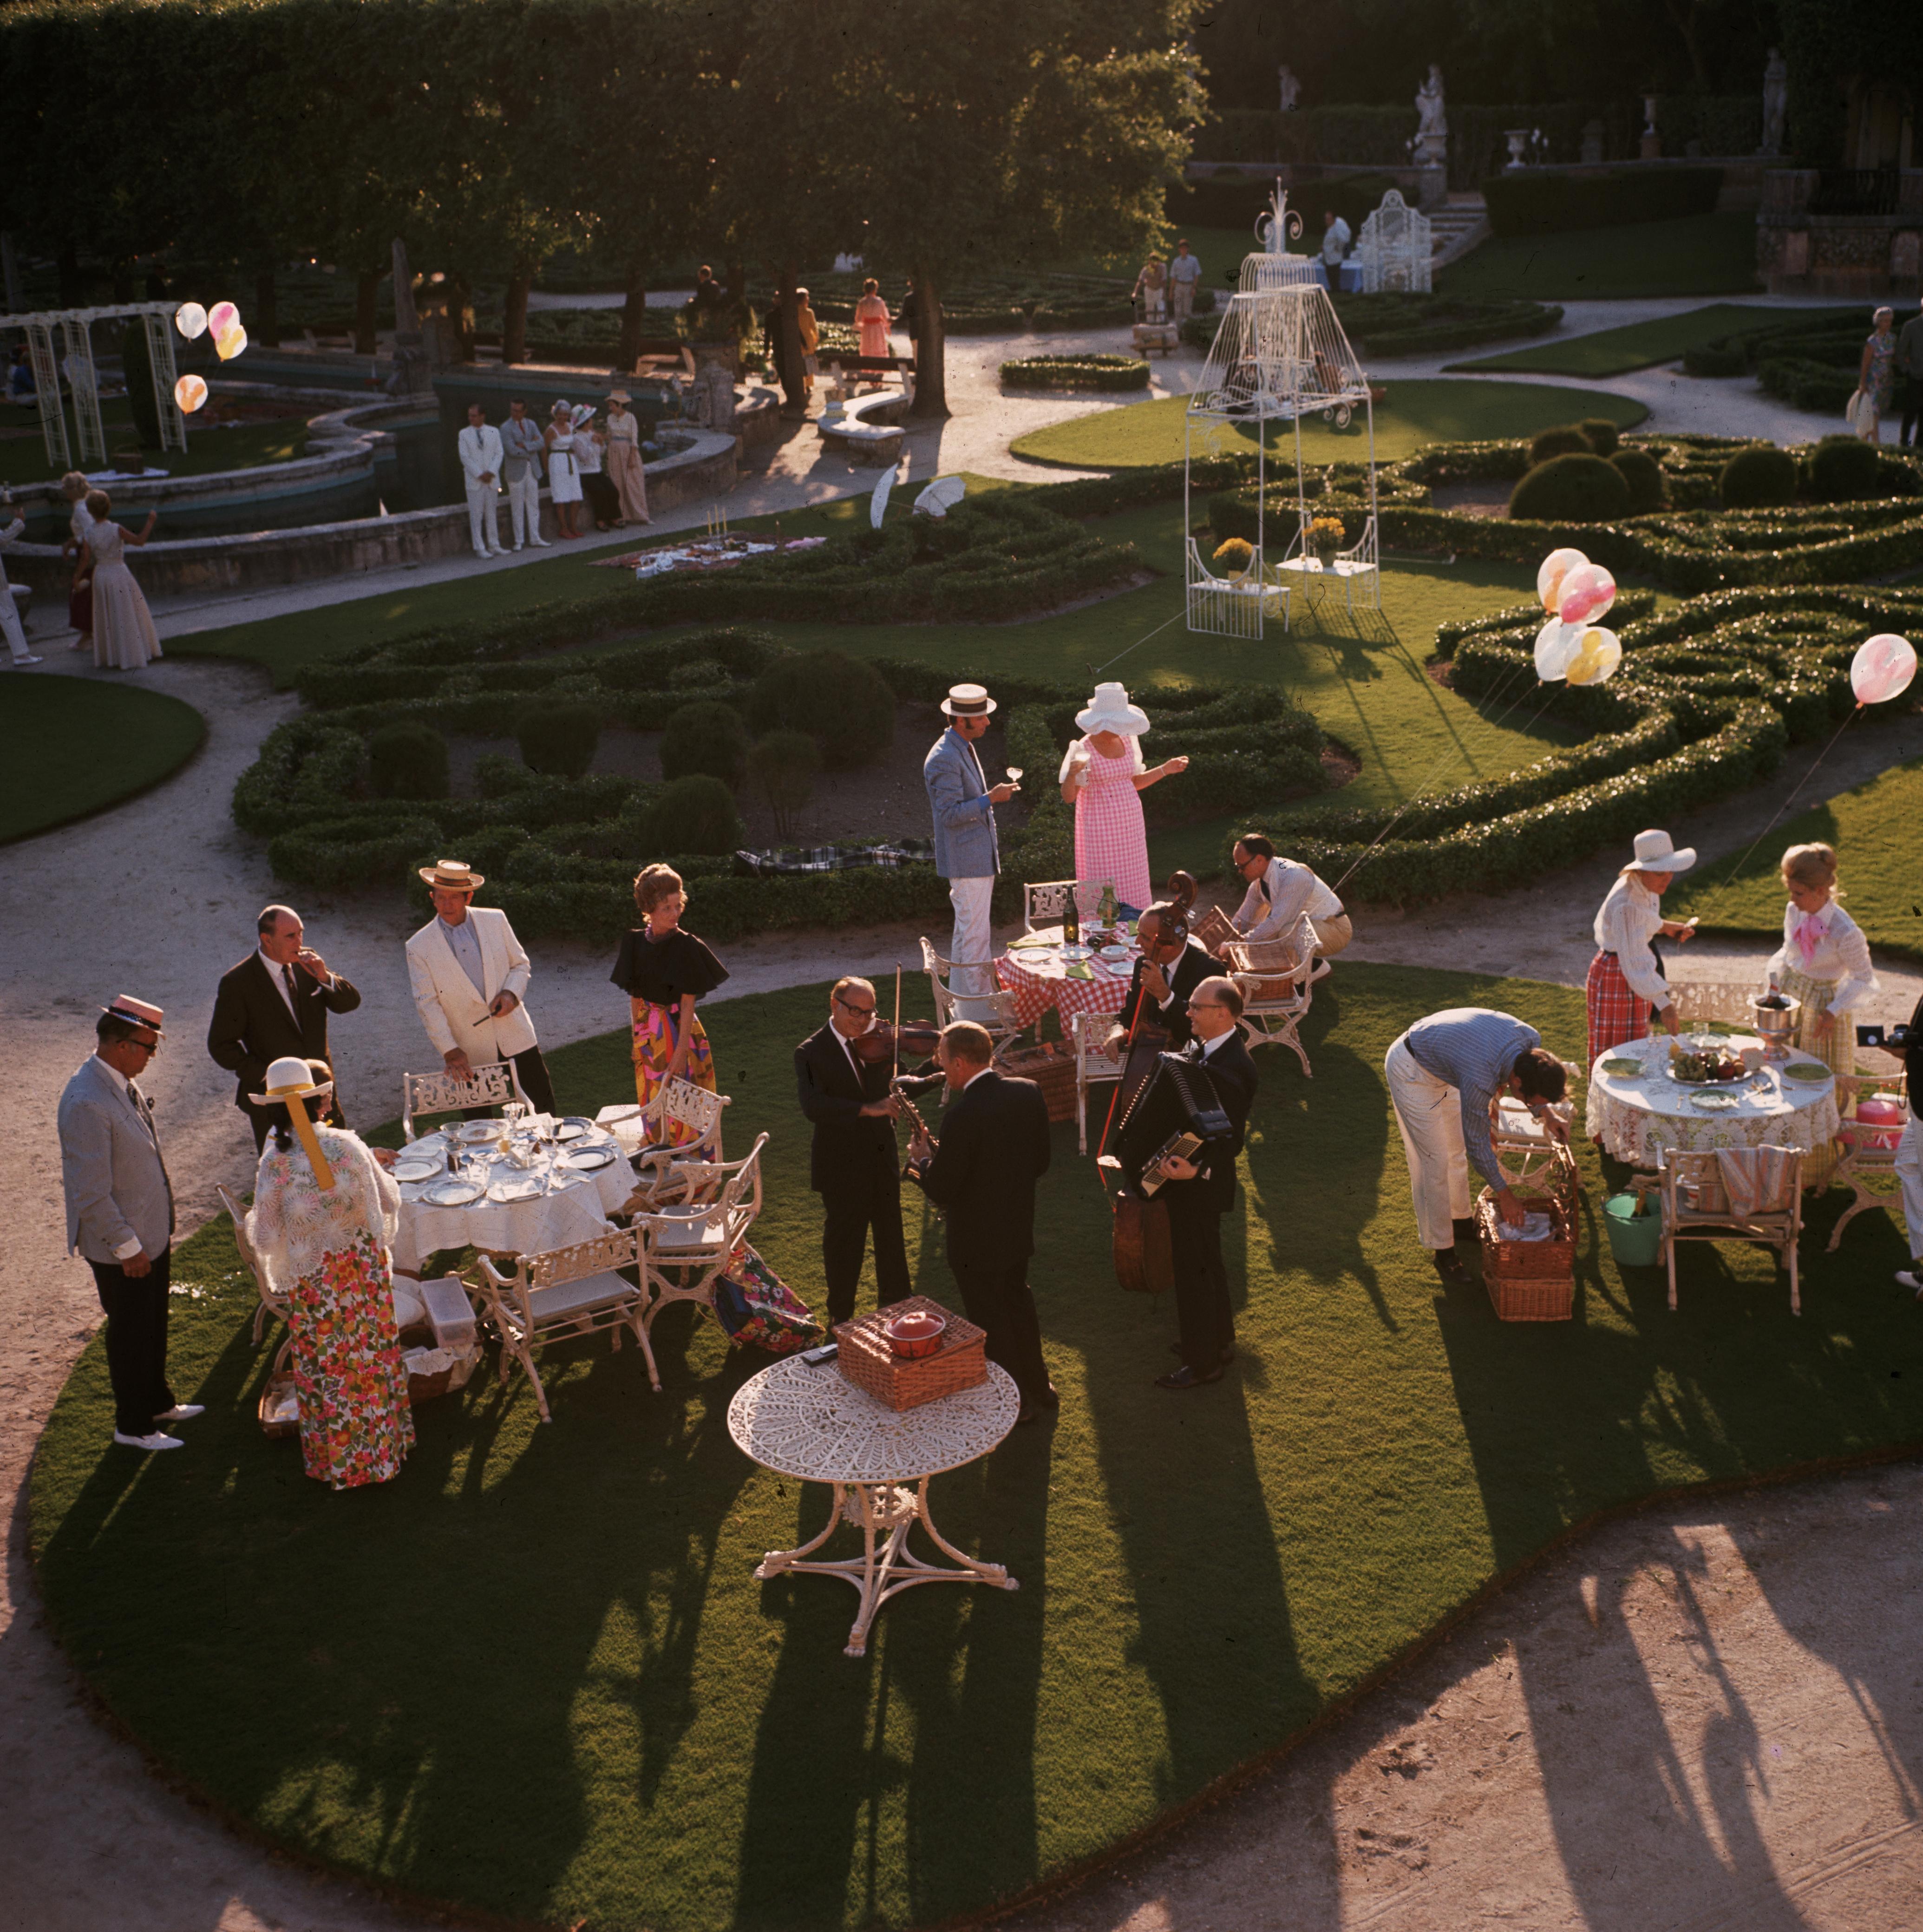 'Garden Party' 1970 Slim Aarons Limited Estate Edition

1970: An elegant garden party in Miami, Florida. (Photo by Slim Aarons)

C Print
Produced from the original transparency
Certificate of authenticity supplied 
THIS PRINT 30x30 inches / 76 x 76